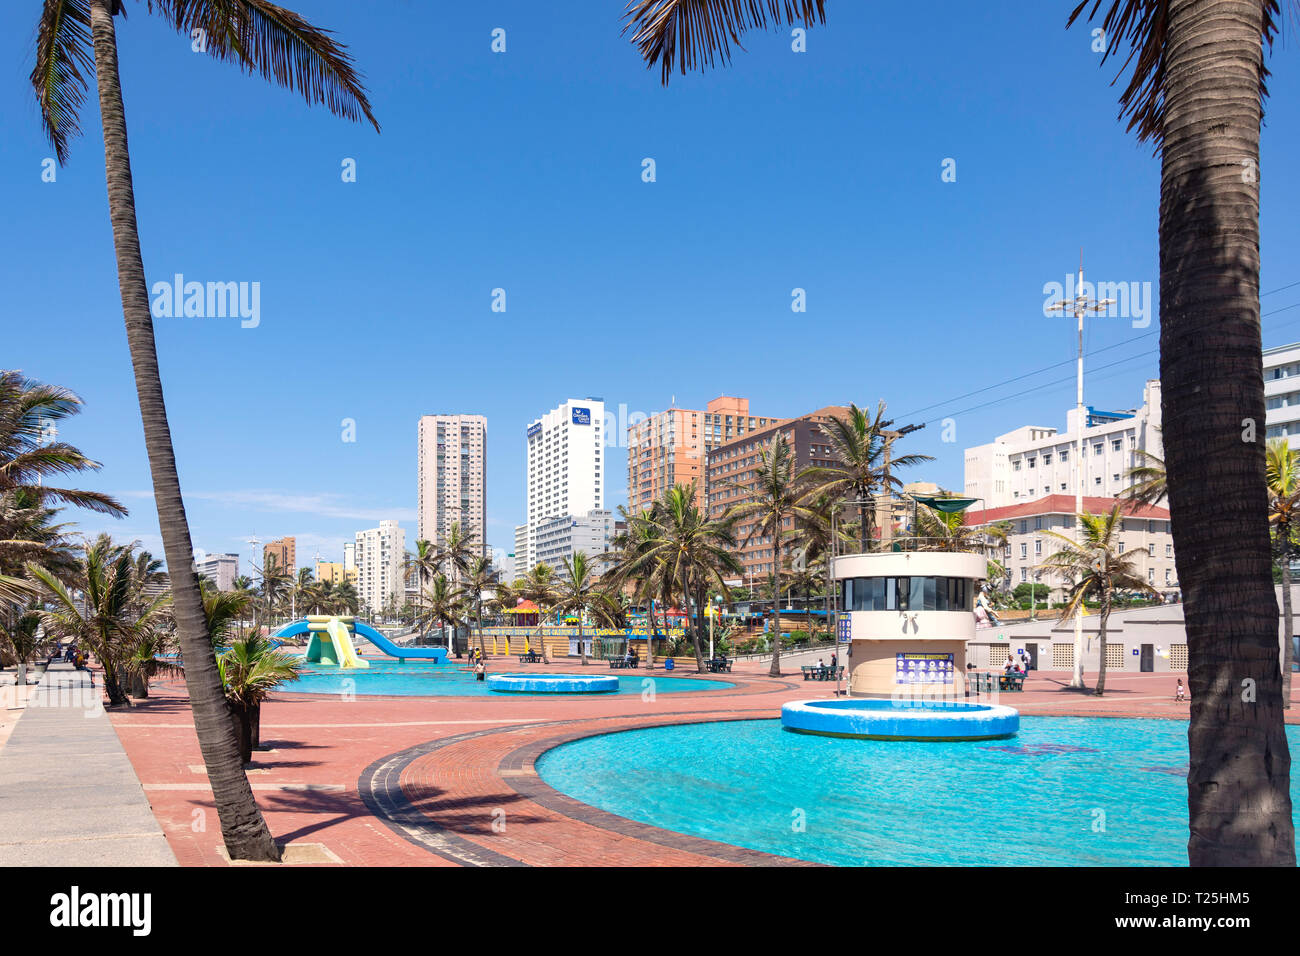 Children's swimming pool and play area on beach promenade, Snell Parade, New Beach, Durban, KwaZulu-Natal, South Africa Stock Photo